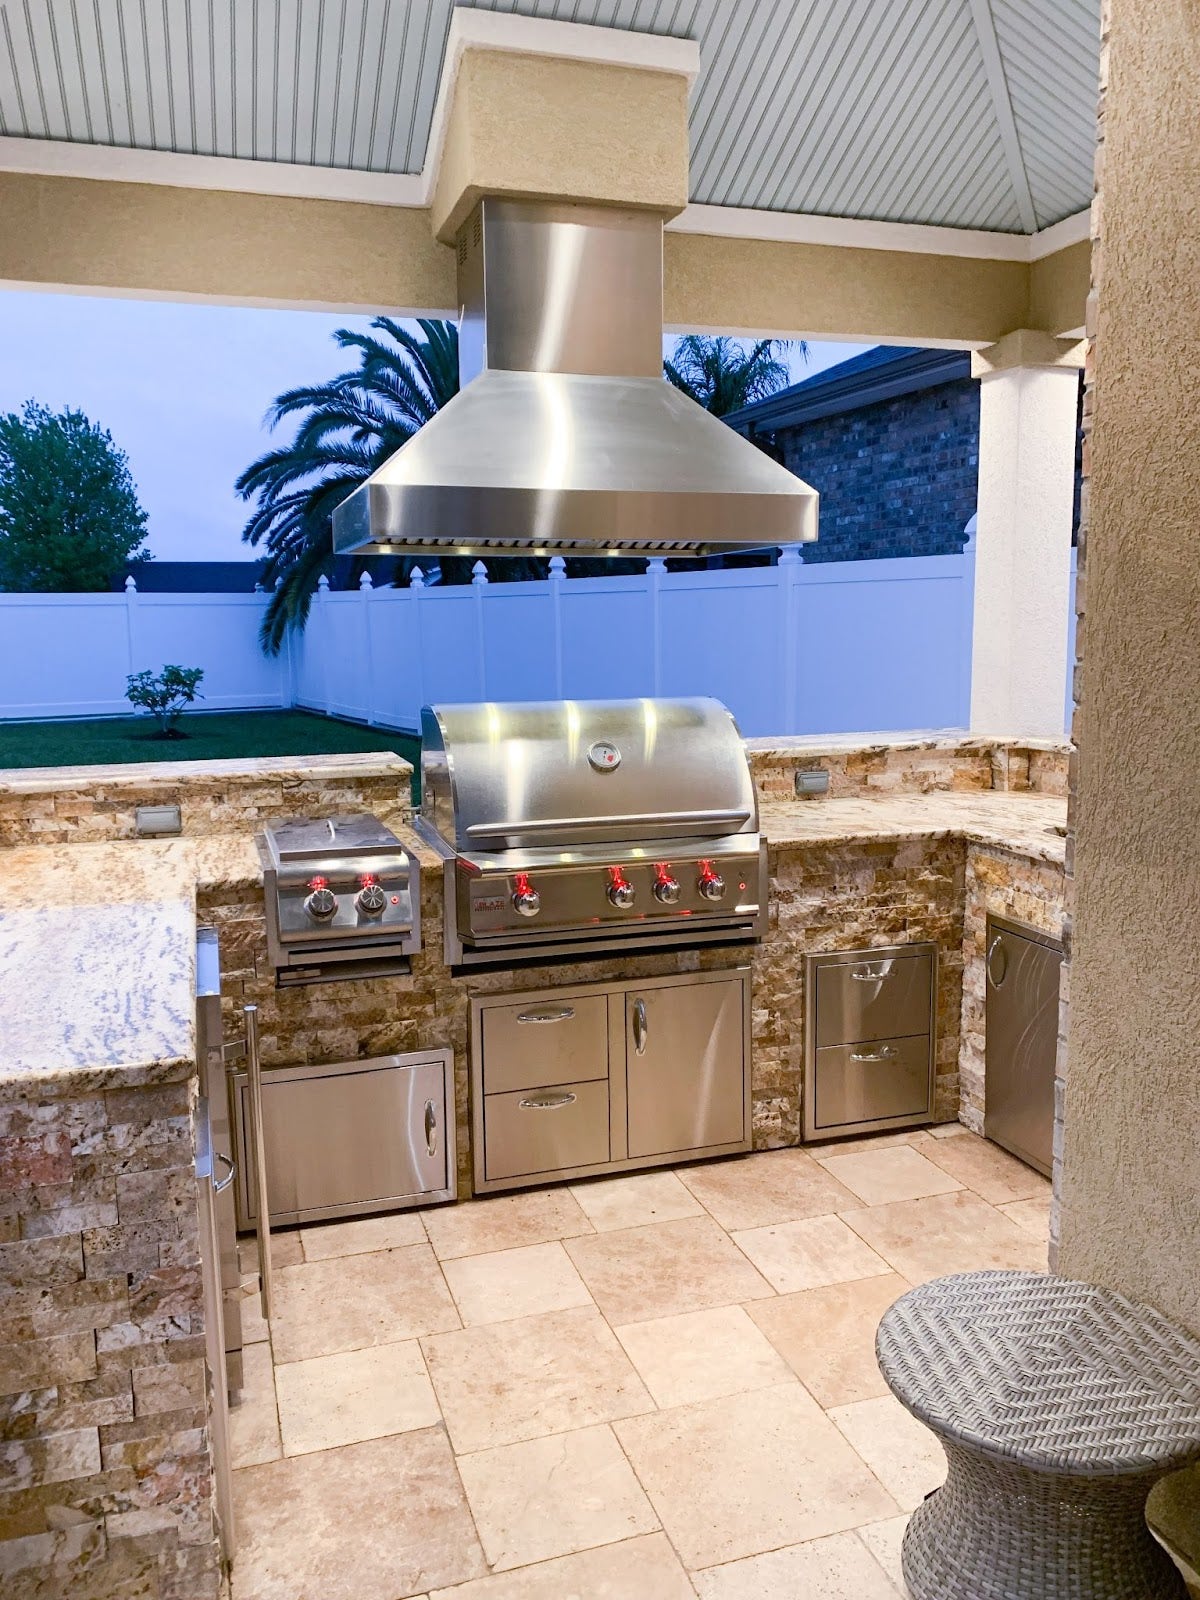 Proline range hood in an elegant outdoor kitchen with stone accents under a covered patio - prolinerangehoods.com